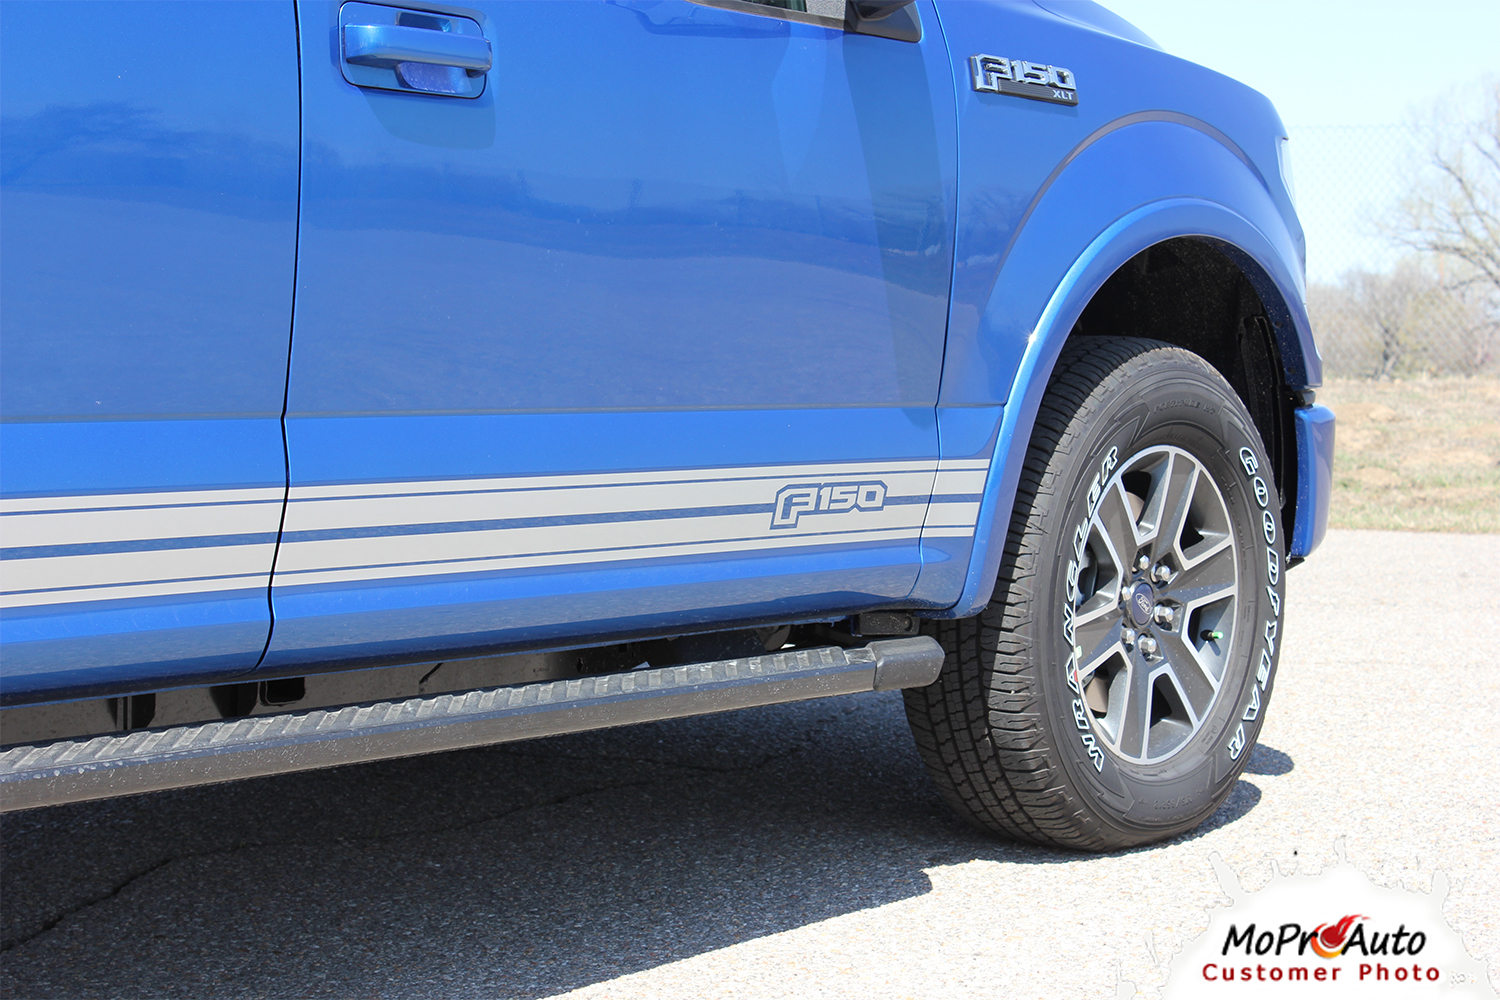 2015, 2016, 2017, 2018, 2019, 2020 Ford  F-150 ROCKER TWO Vinyl Graphics and Decals Kit - MoProAuto Pro Design Series